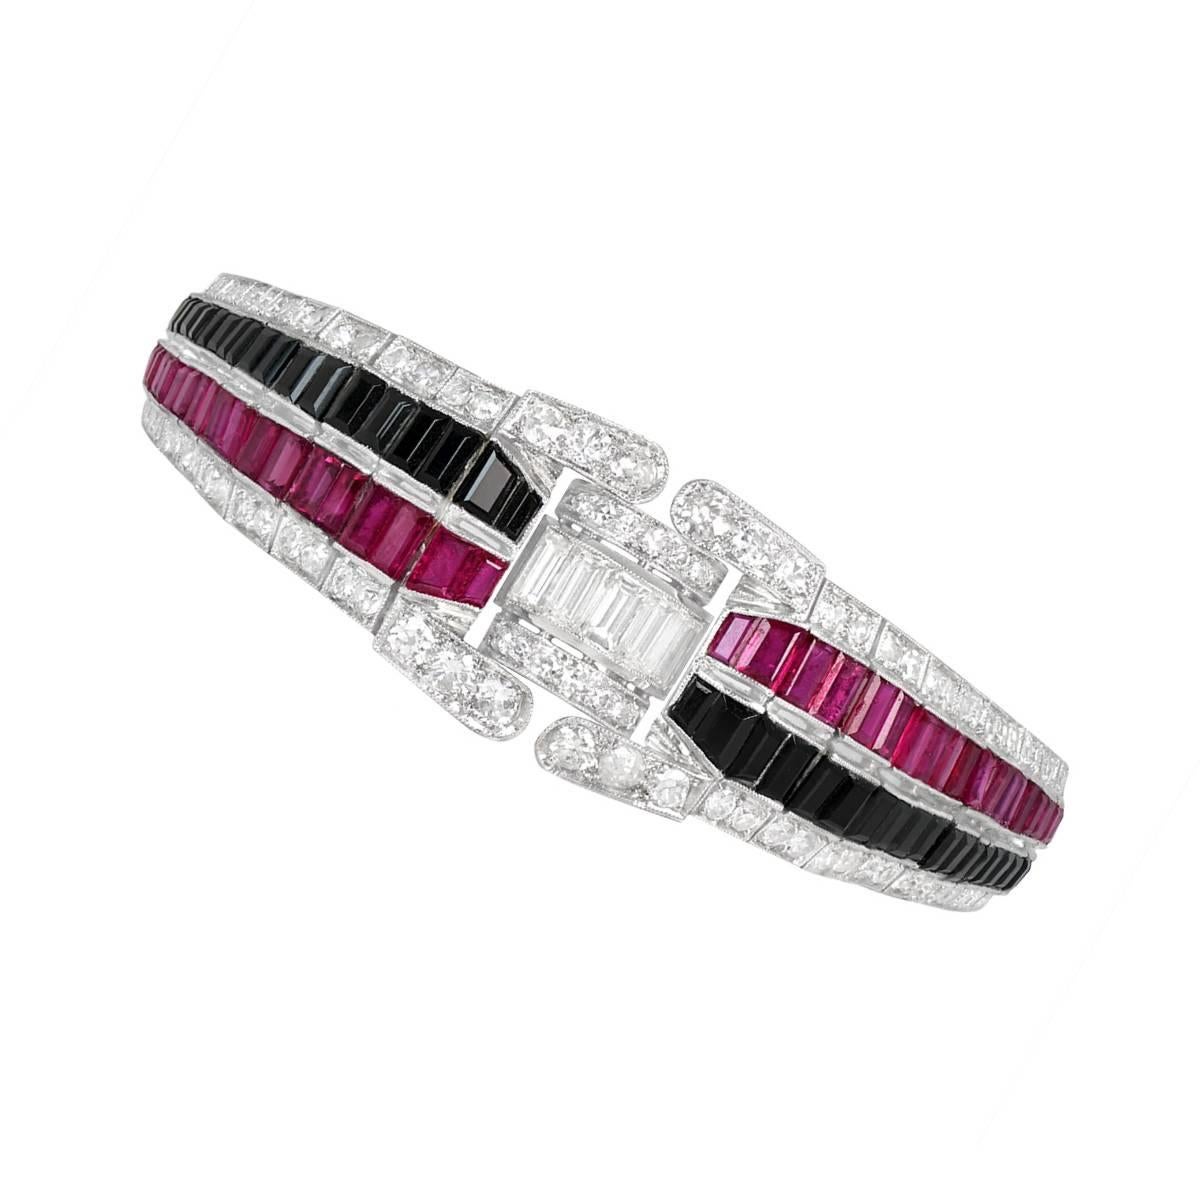 Antique 6ct Baguette Cut Diamond, Rubies and Onyx Bracelet,  Platinum  In Excellent Condition For Sale In New York, NY